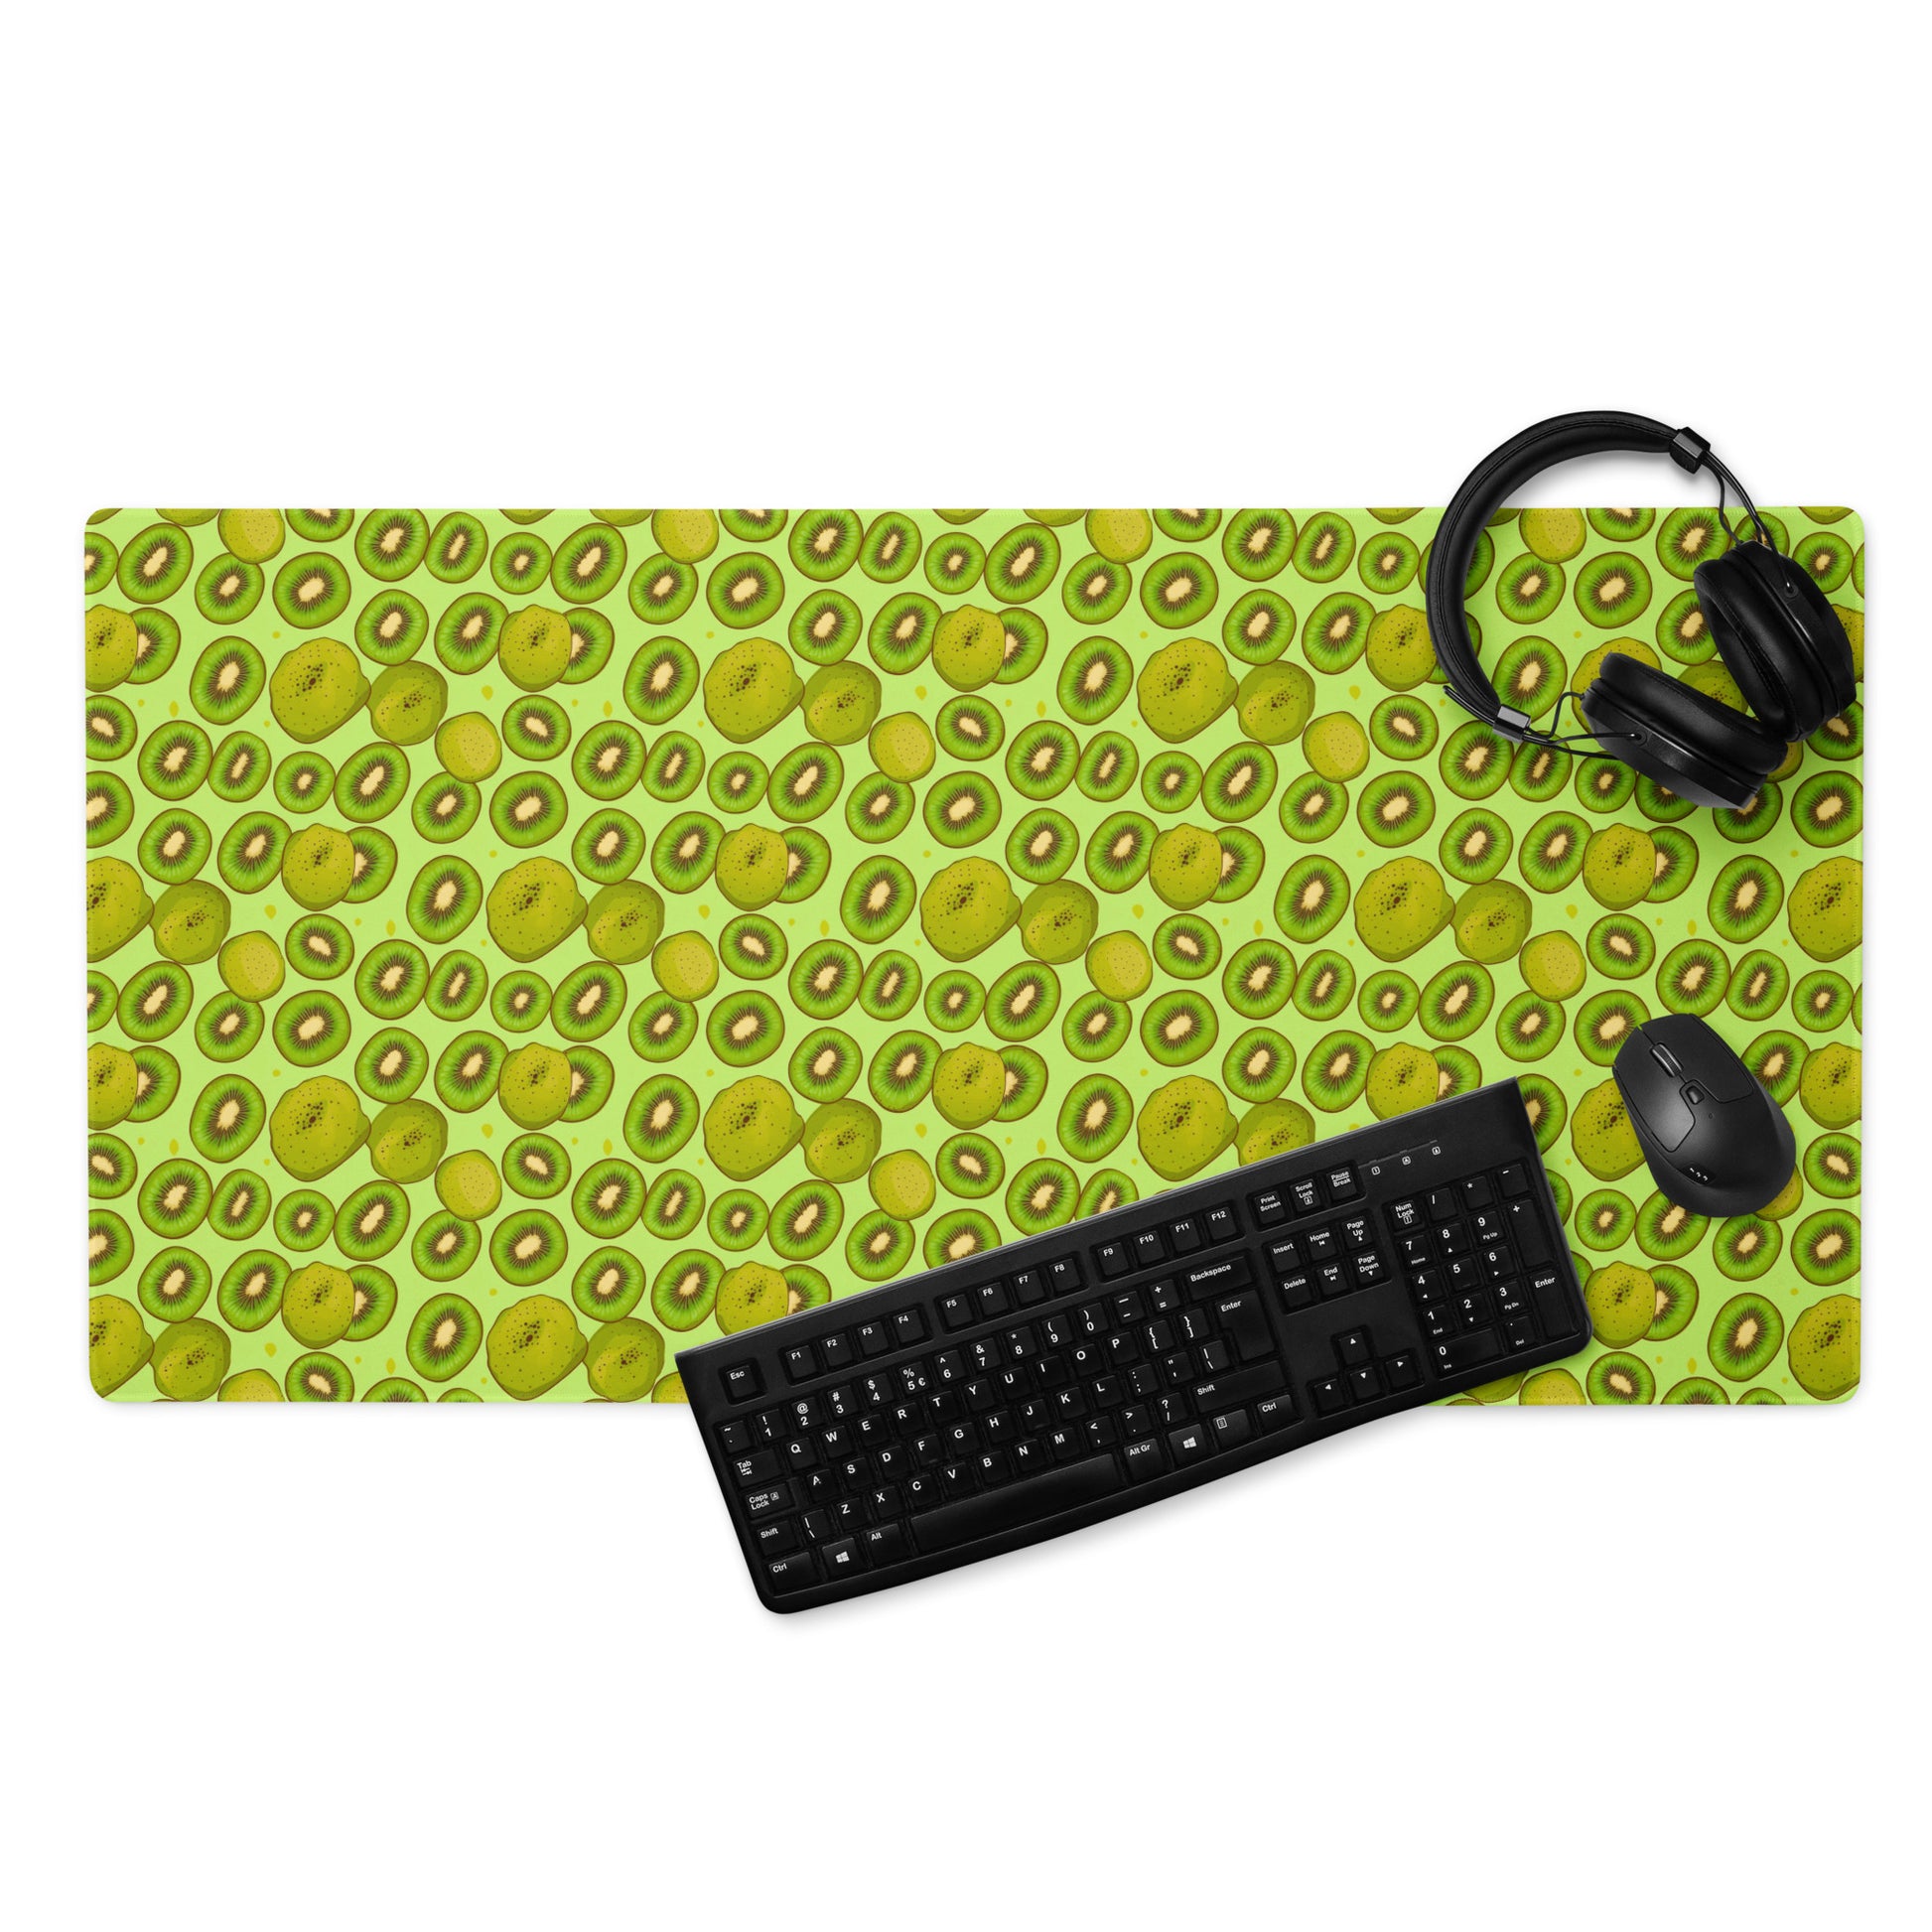 A 36" x 18" desk pad with Kiwis all over it displayed with a keyboard, headphones and a mouse. Green in color.